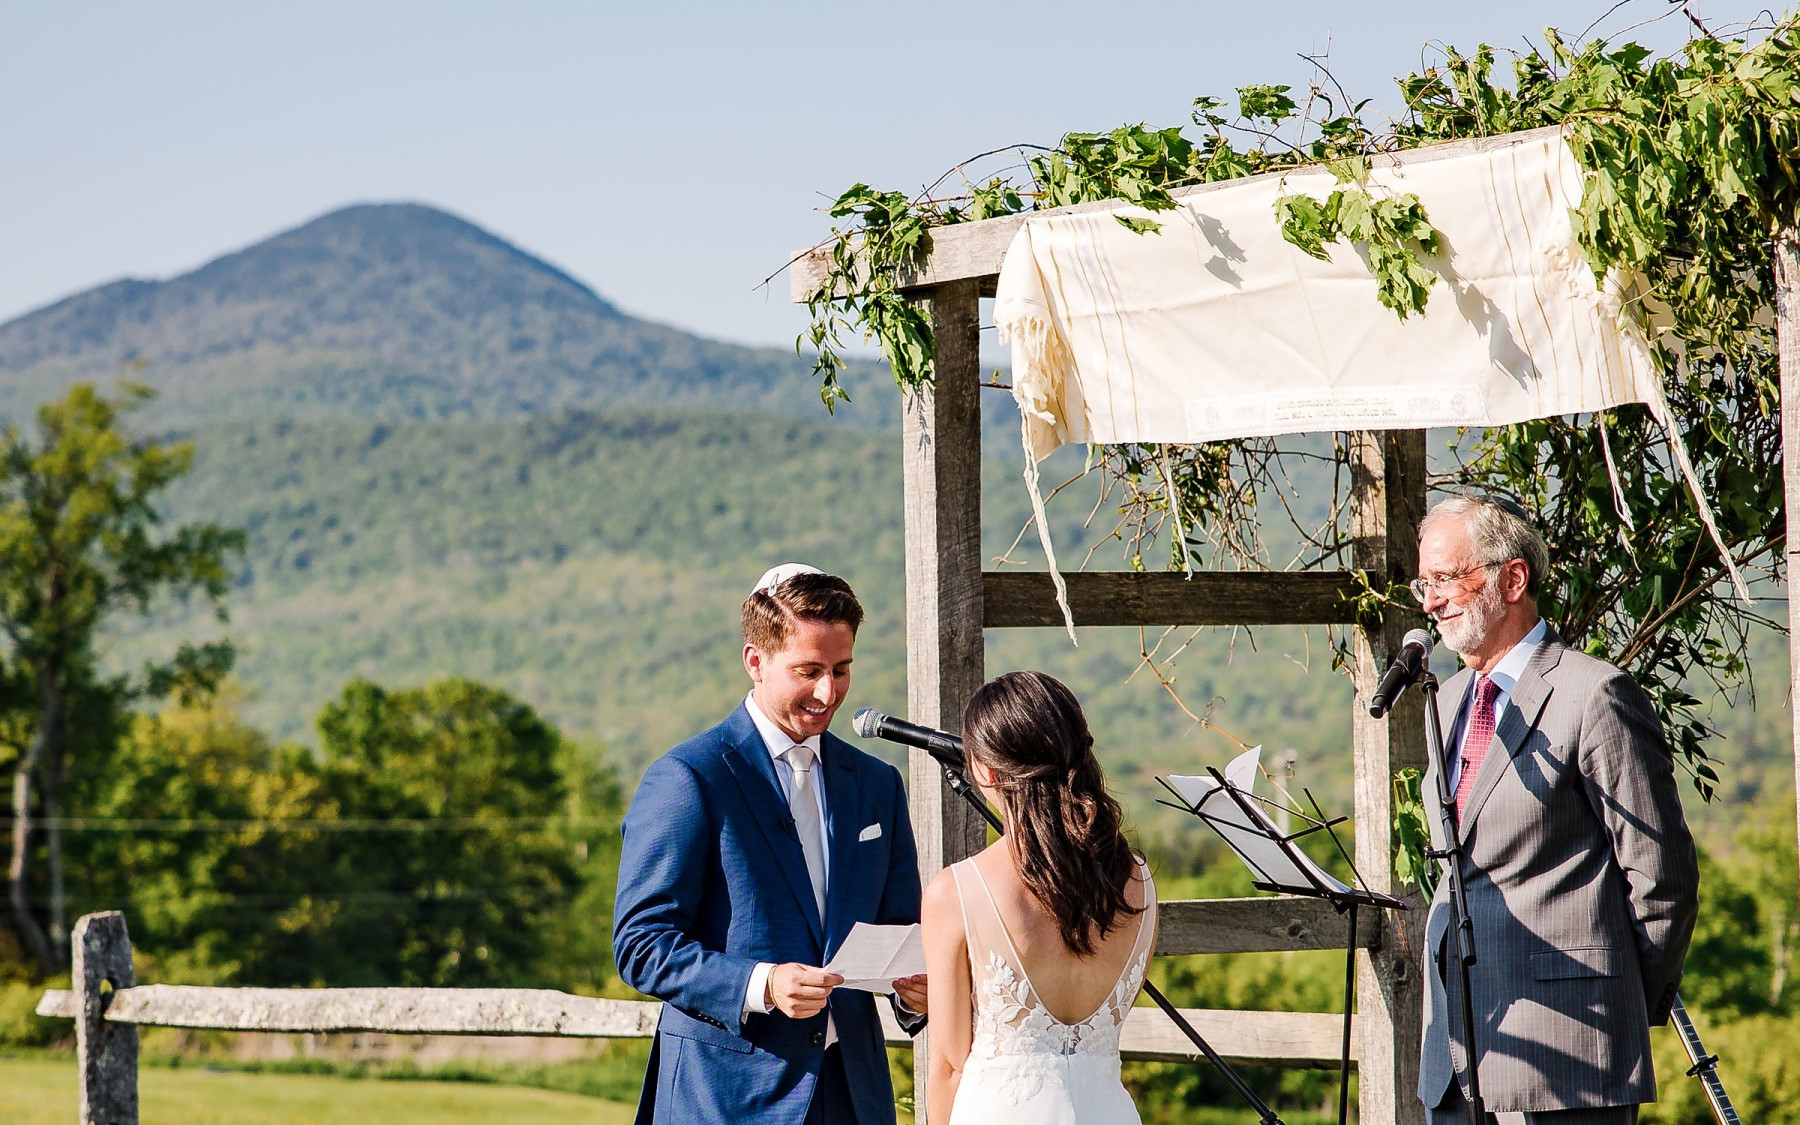 wedding knoll featuring bride and groom exchanging vows overlooking Green mountains.